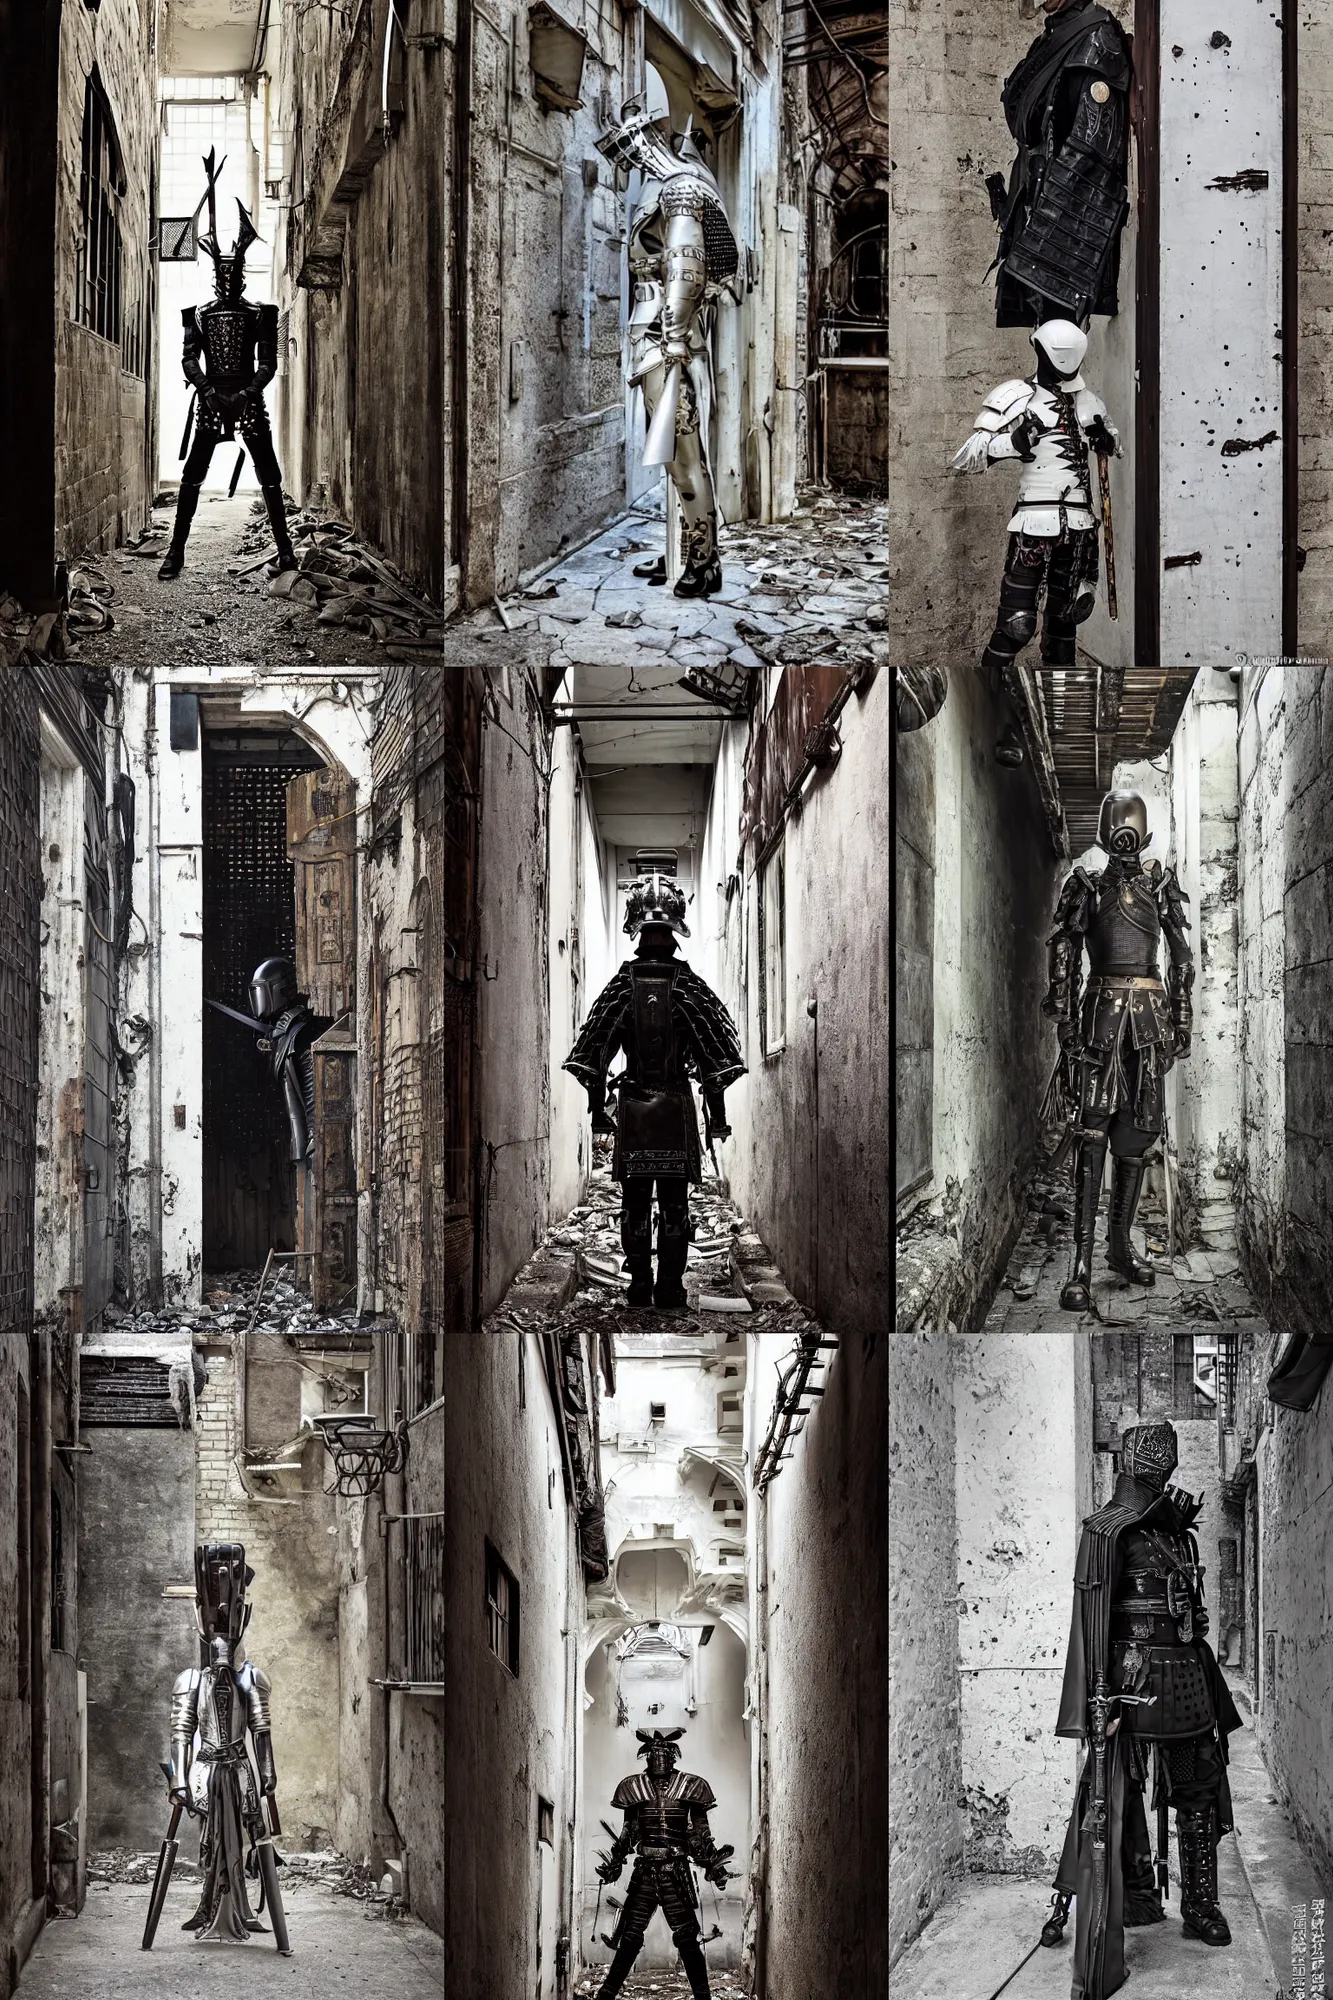 Prompt: white ancestral ornate medieval tactical gear standing inside an alleyway, black leather samurai garment, long shot, dark abandoned city streets, by irving penn and storm thorgerson, ren heng, peter elson, alvar aalto